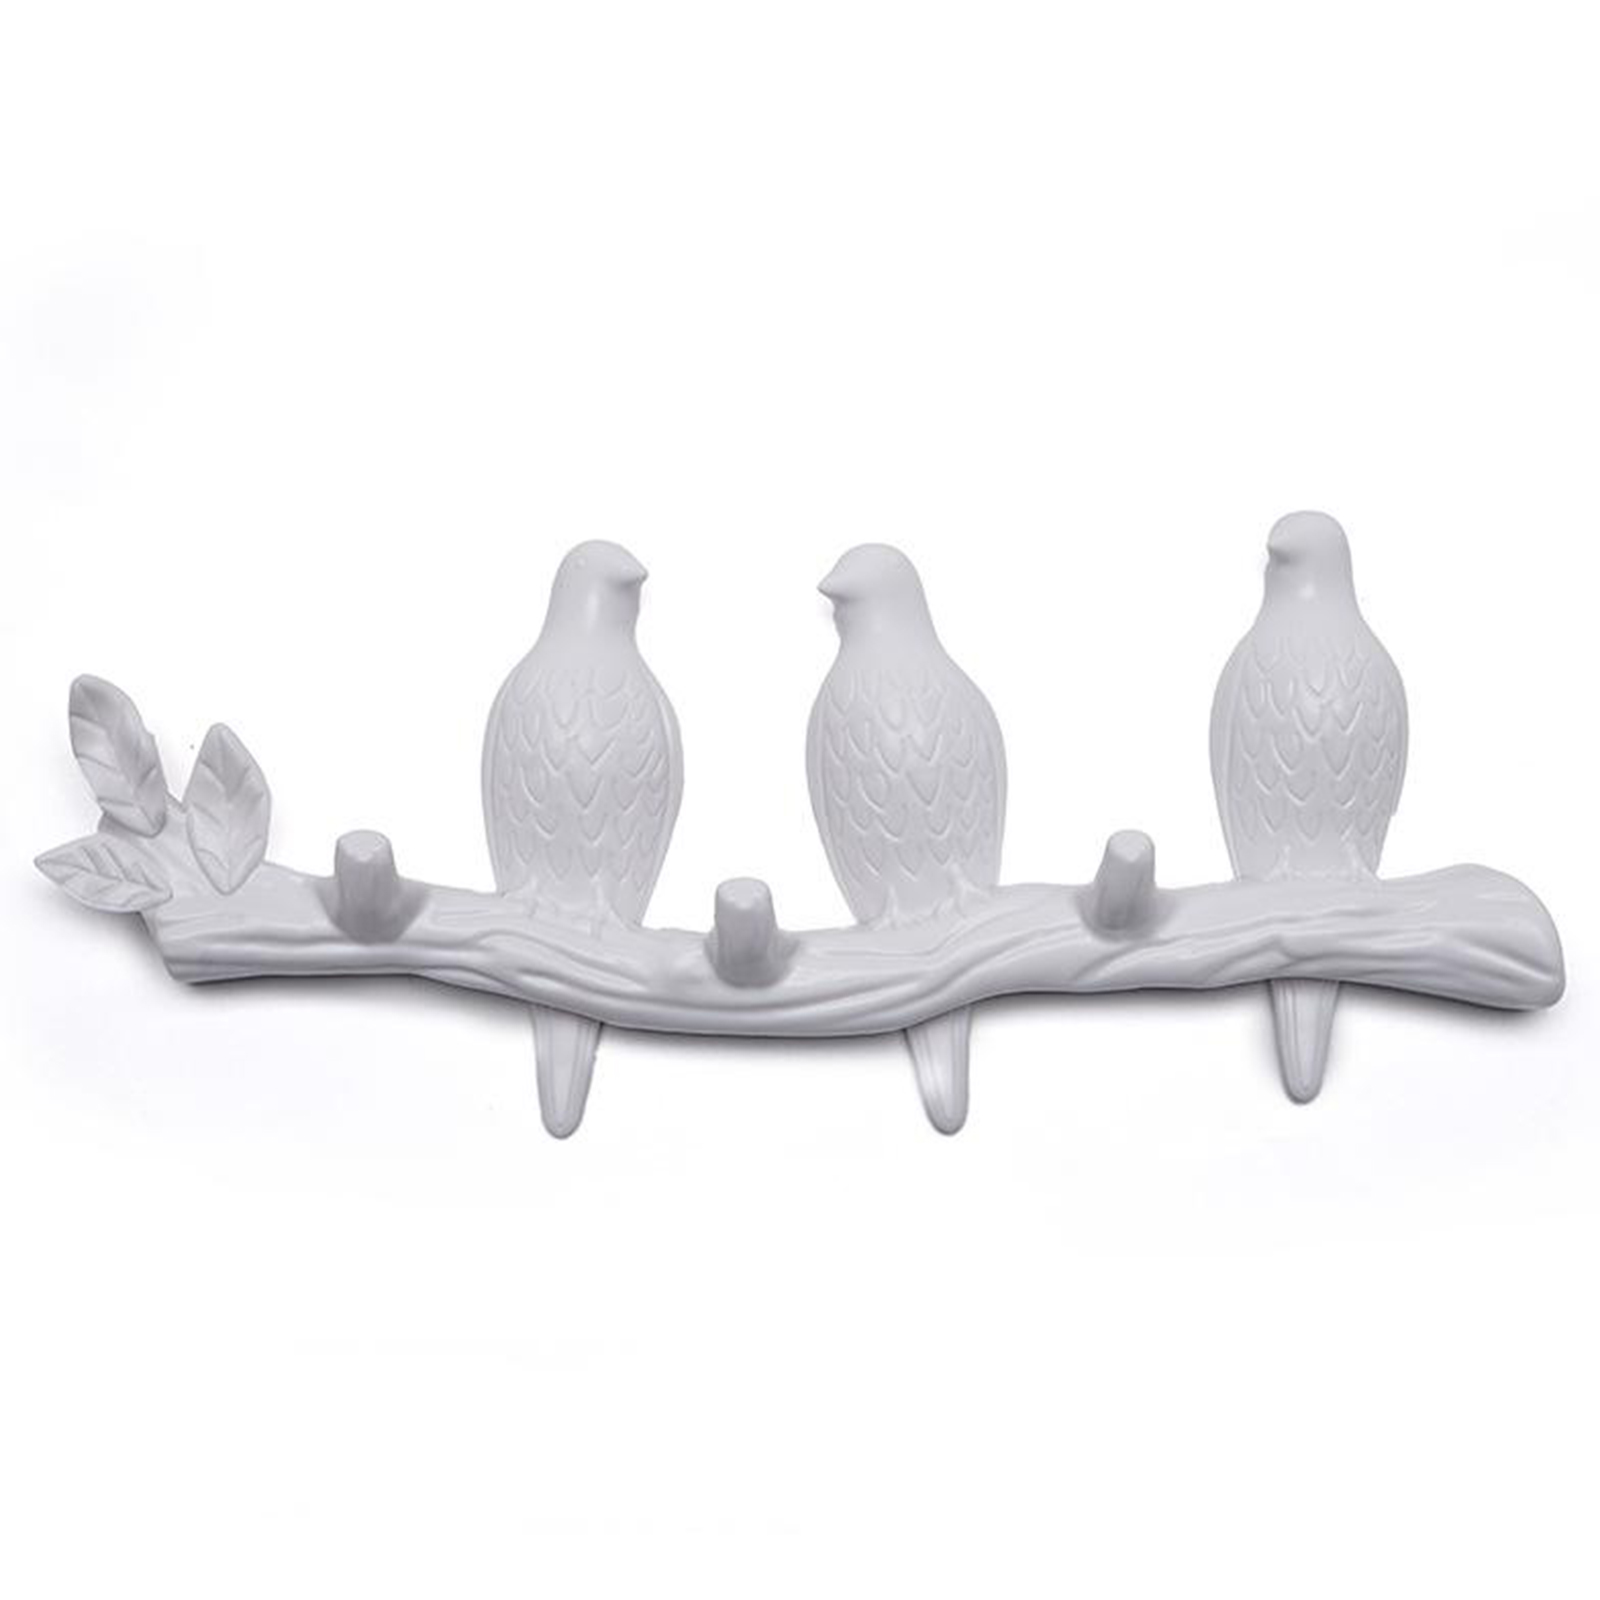 Birds on Branch Wall-mounted Hook Clothes Cap Key Towels Holder Porch Living Room Bedroom Storage Wall Ornament Gift